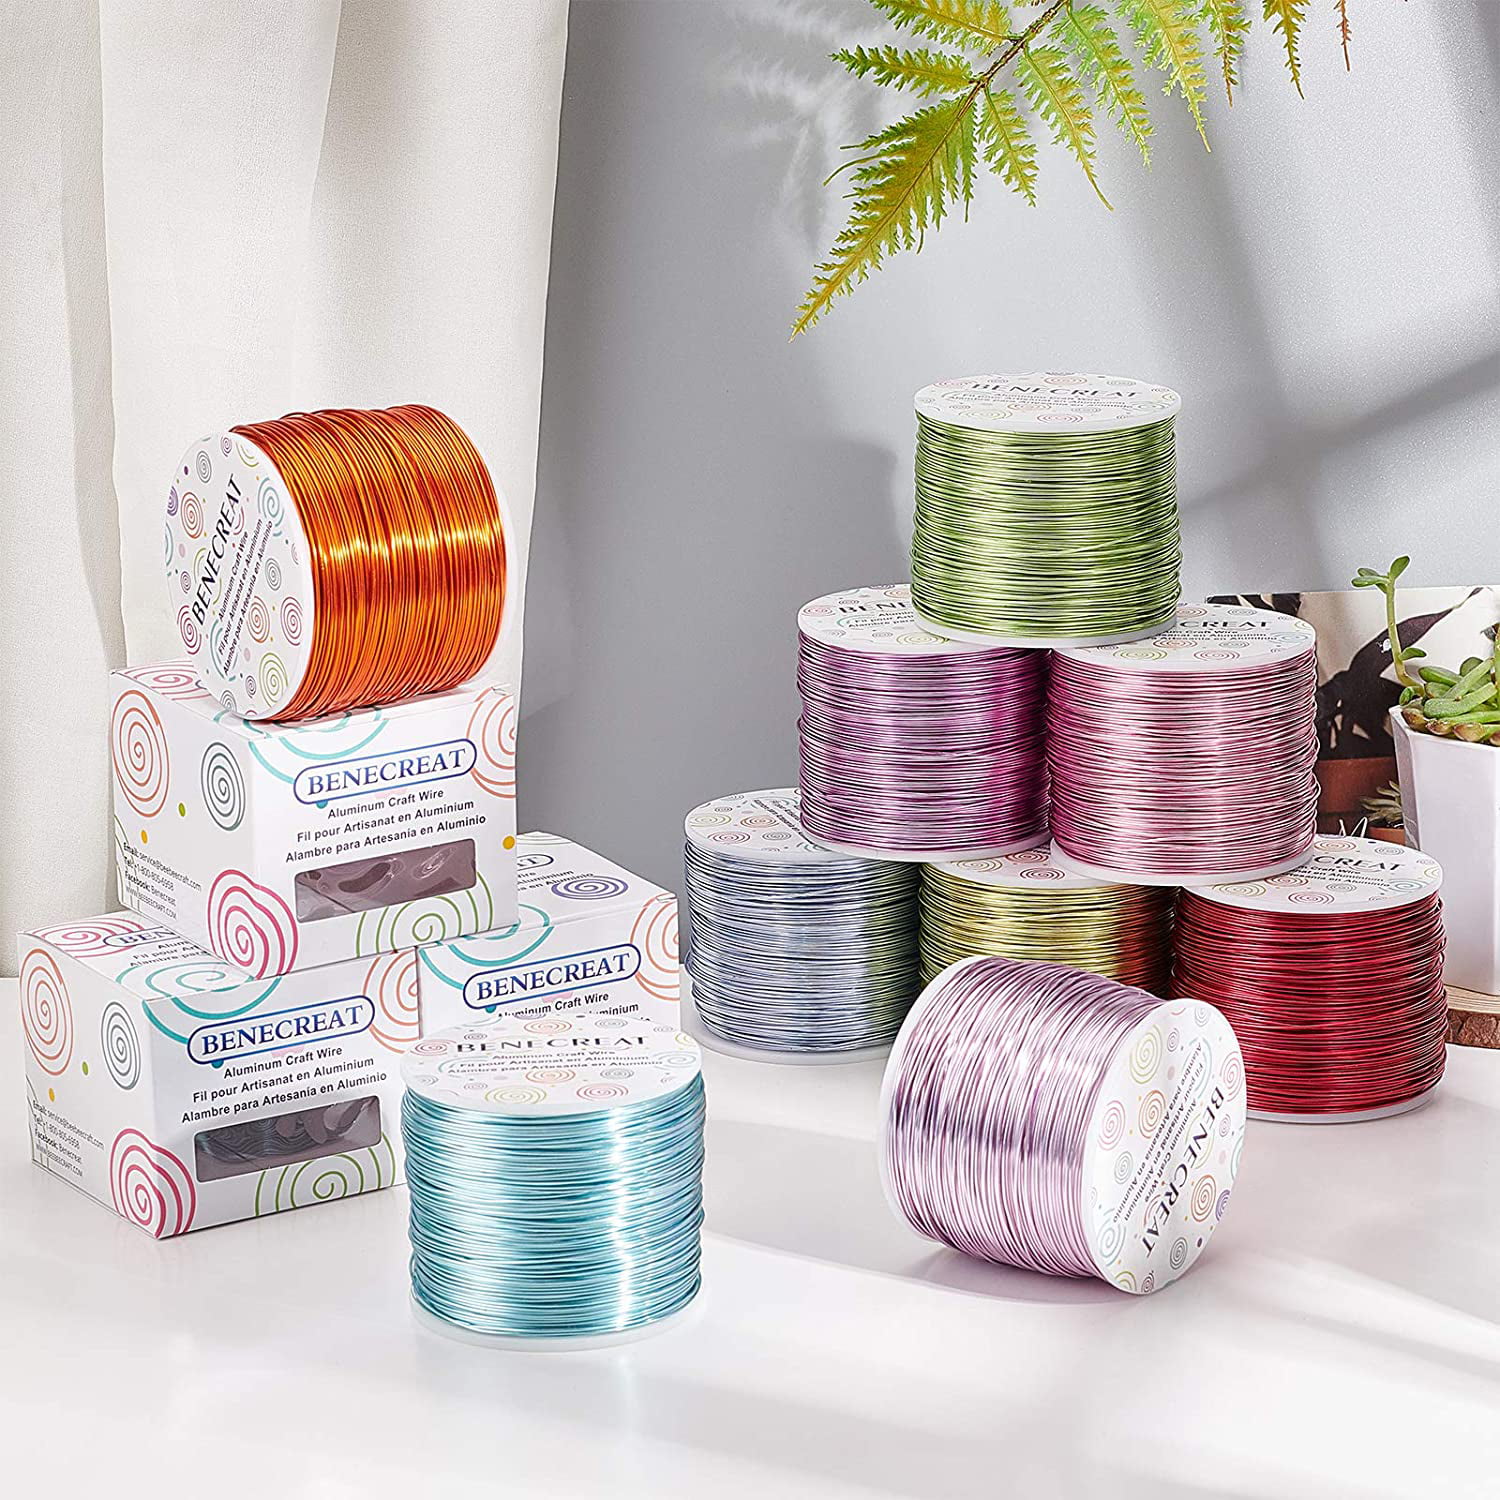 Wholesale BENECREAT 22 Gauge 850FT Aluminum Wire Anodized Jewelry Craft  Making Beading Floral Colored Aluminum Craft Wire - Silver 